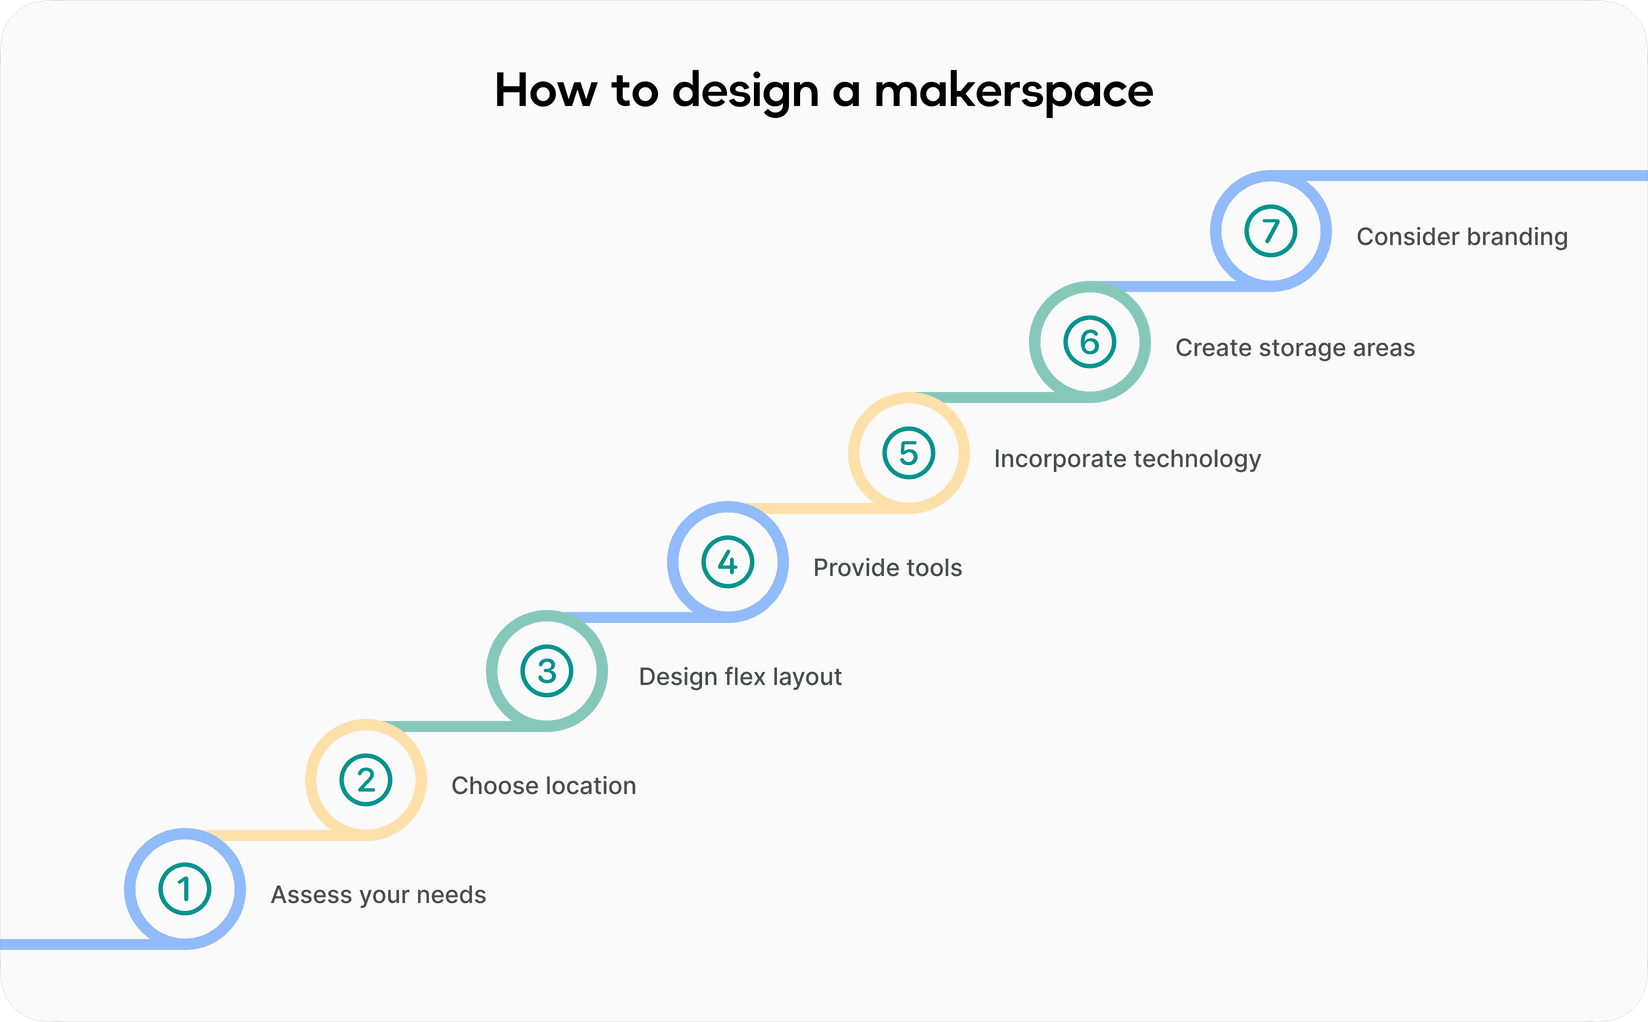 How to design a makerspace